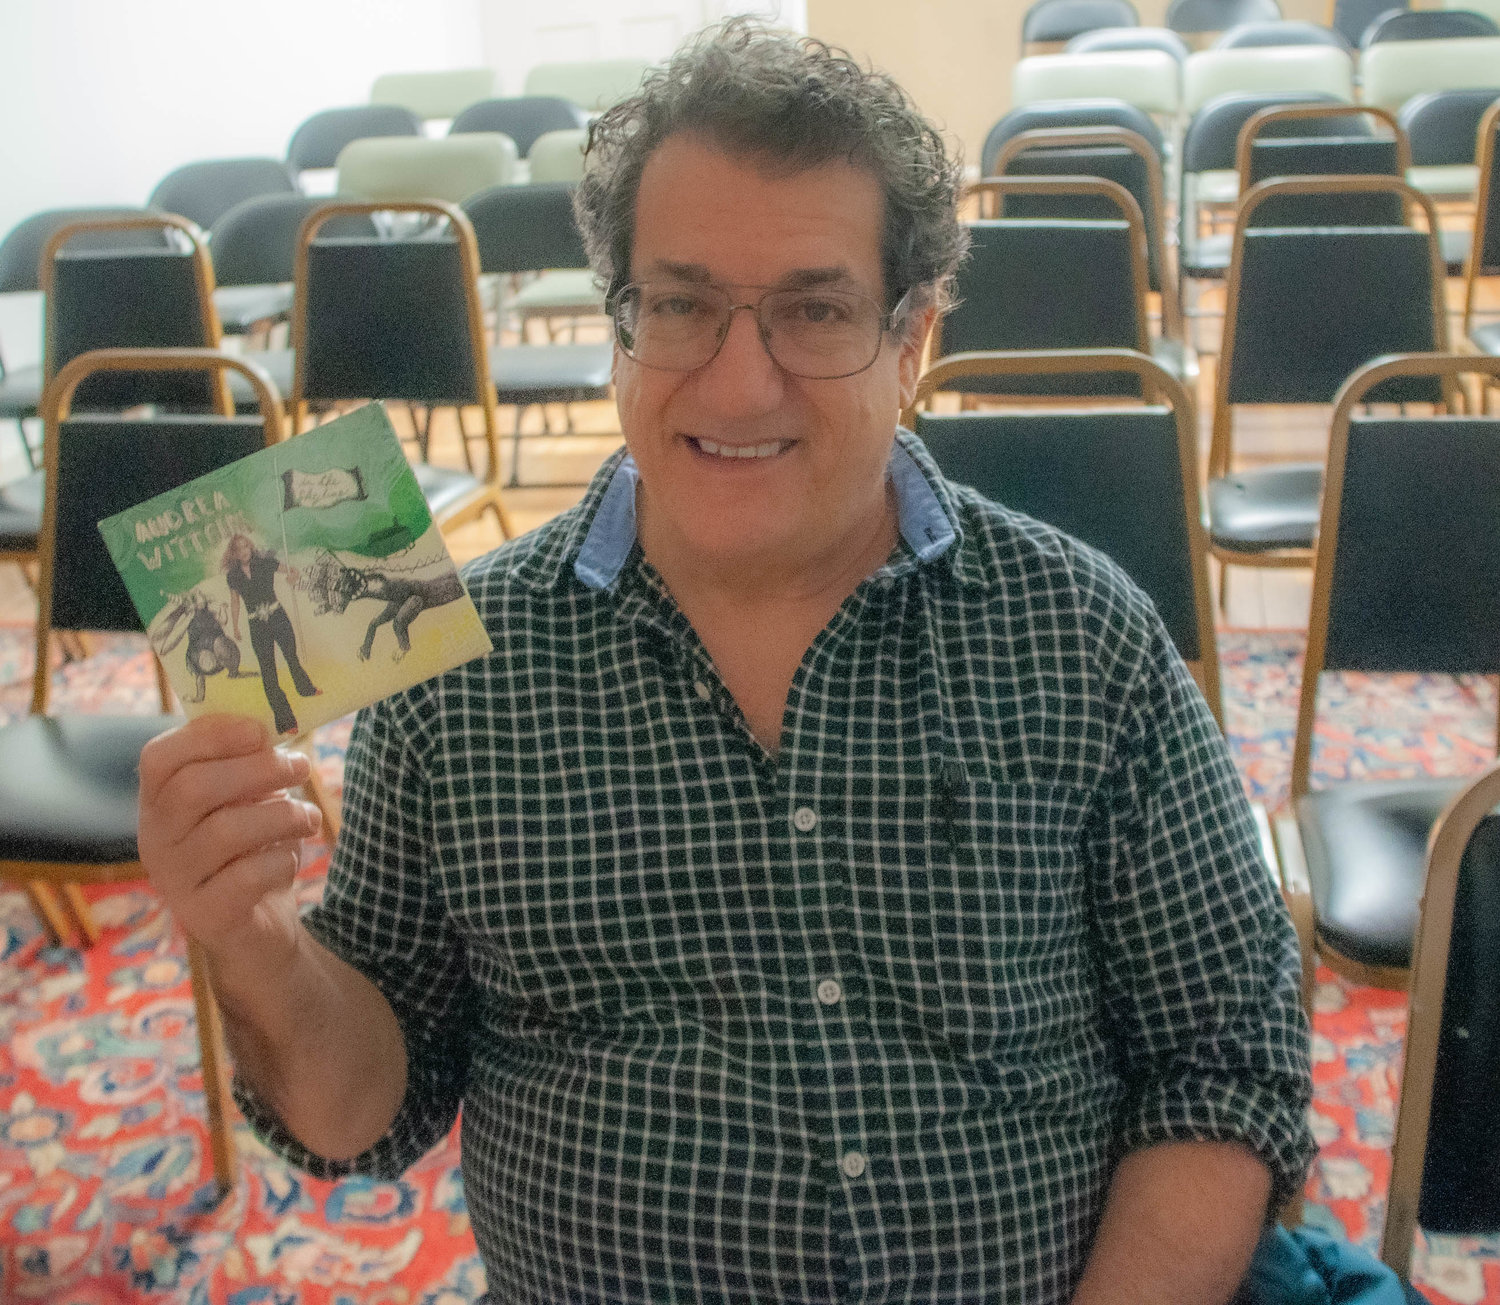 Local musician Keith Newman was the first in line to take his seat for Andrea Wittgens' performance of "Songs and Visions" at DVAA last Saturday. "I brought a CD for her to sign," Keith told me before the audience entered Krause Hall. "She's amazing. I'm her biggest fan!"